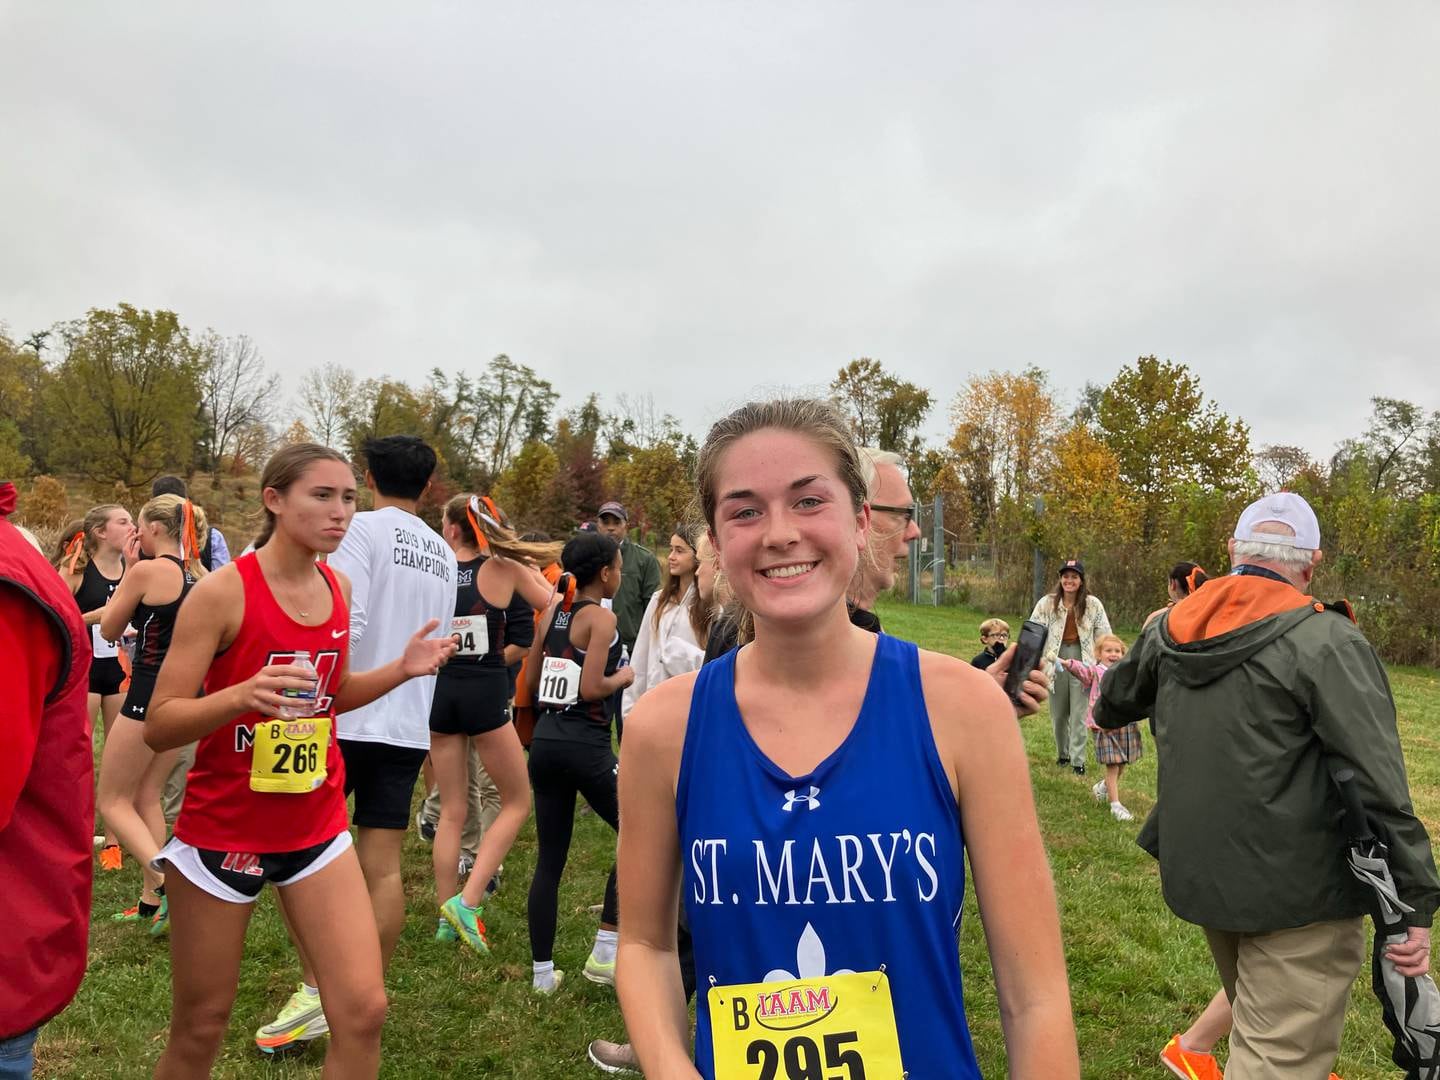 St. Mary’s senior Chloe McCarthy was the overall winner in the Interscholastic Athletic Association of Maryland championship meet Tuesday afternoon at the Baltimore County Agricultural Center in Cockeysville, recording a personal-record 19:27 on the hilly course.